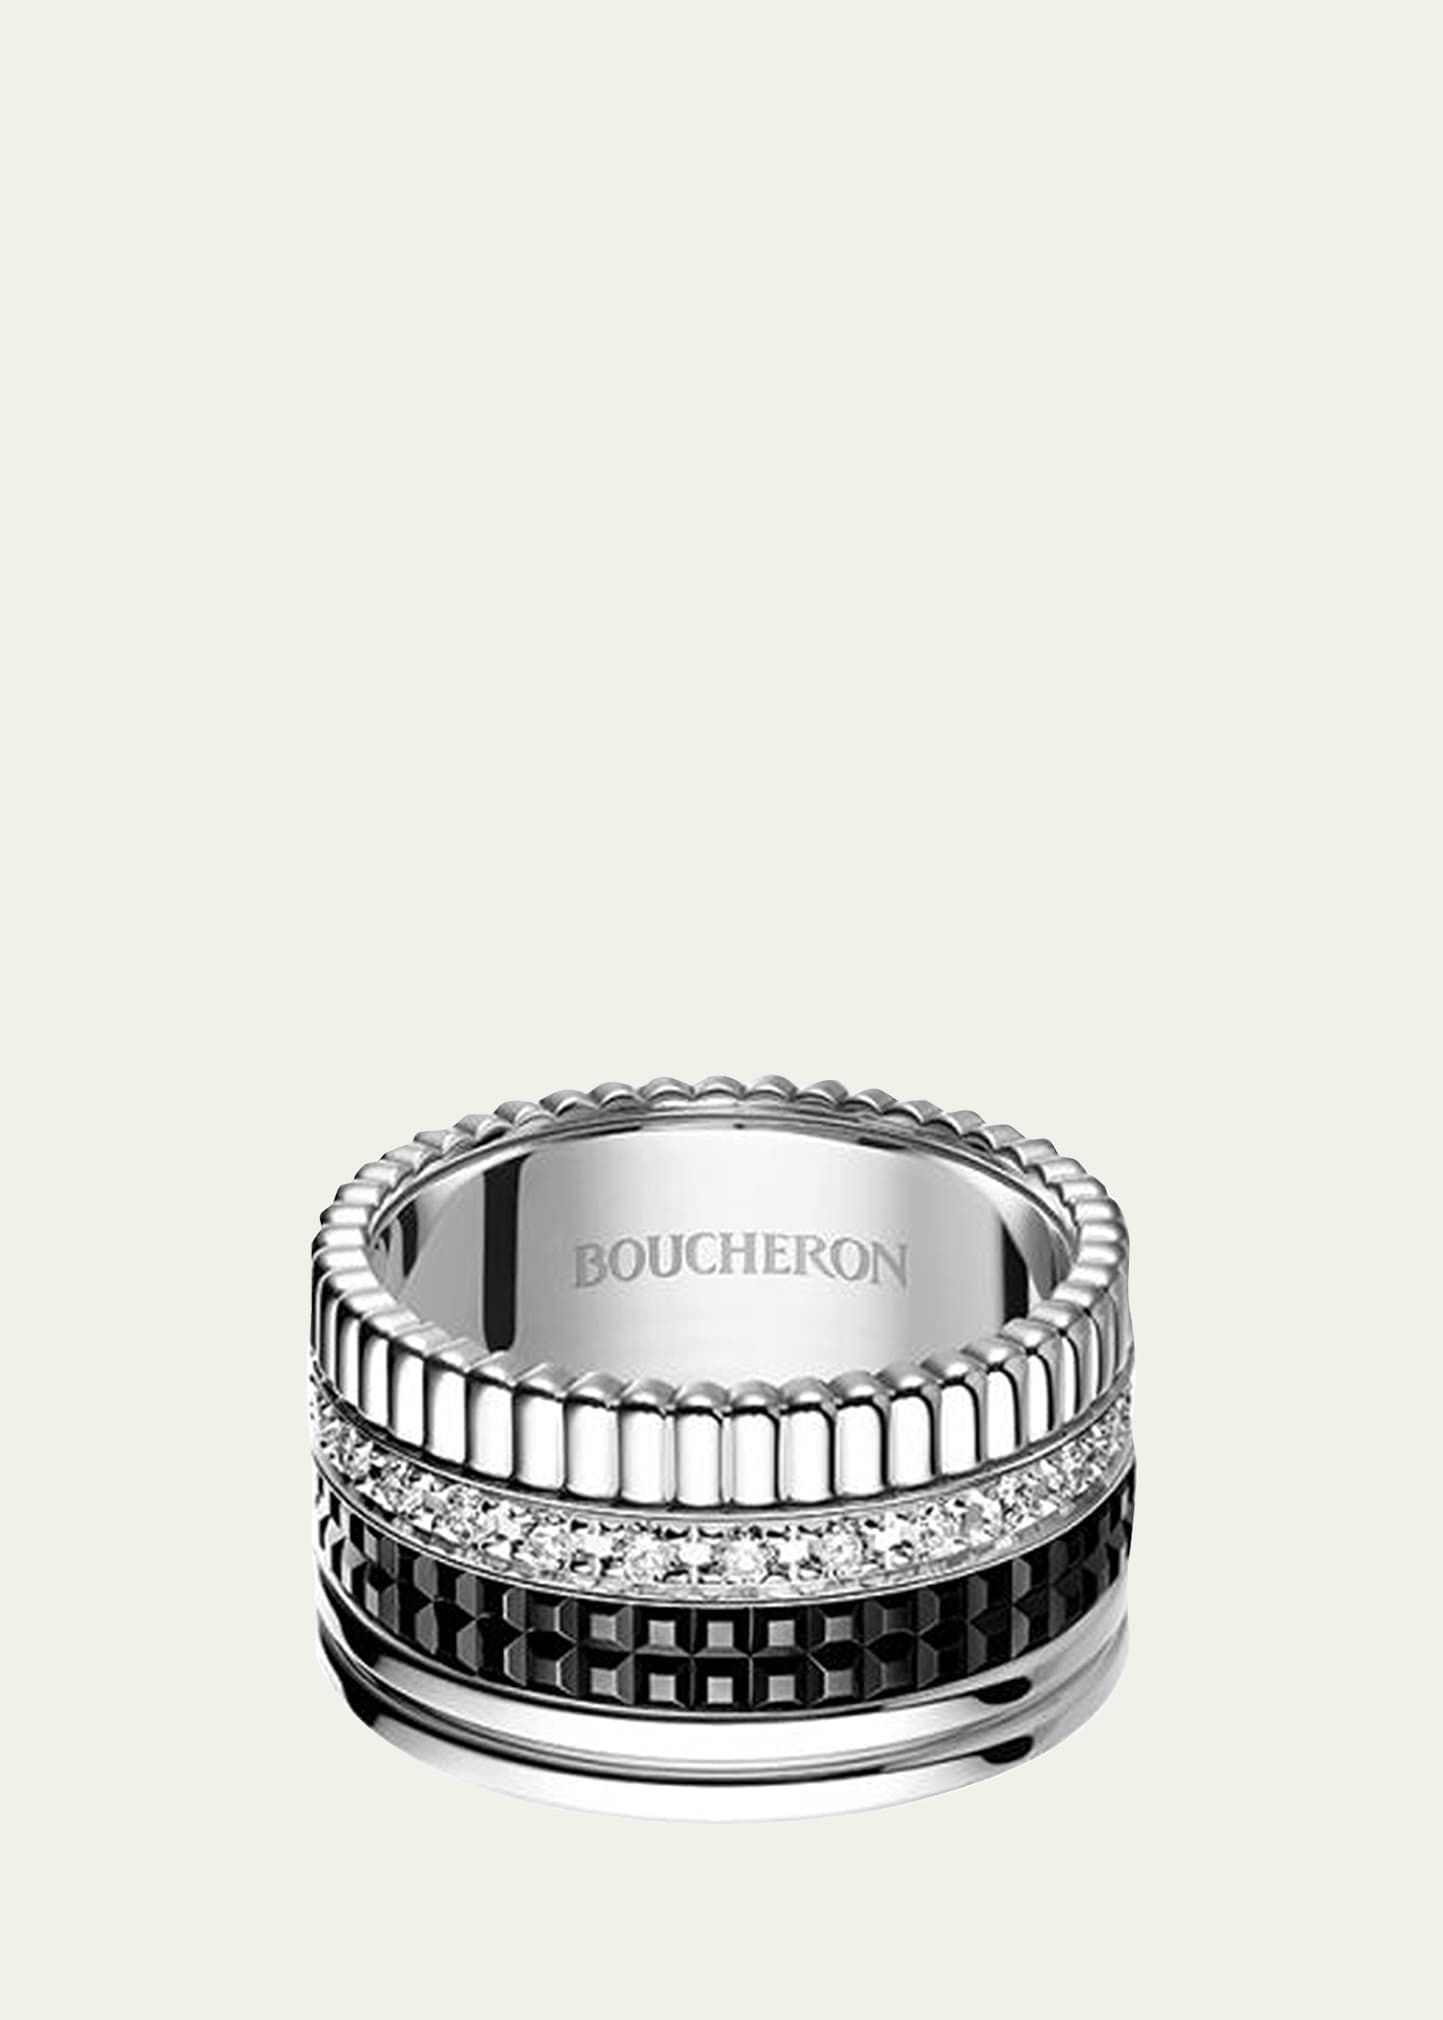 BOUCHERON QUATRE BLACK EDITION LARGE RING WITH WHITE GOLD, PVD AND DIAMONDS